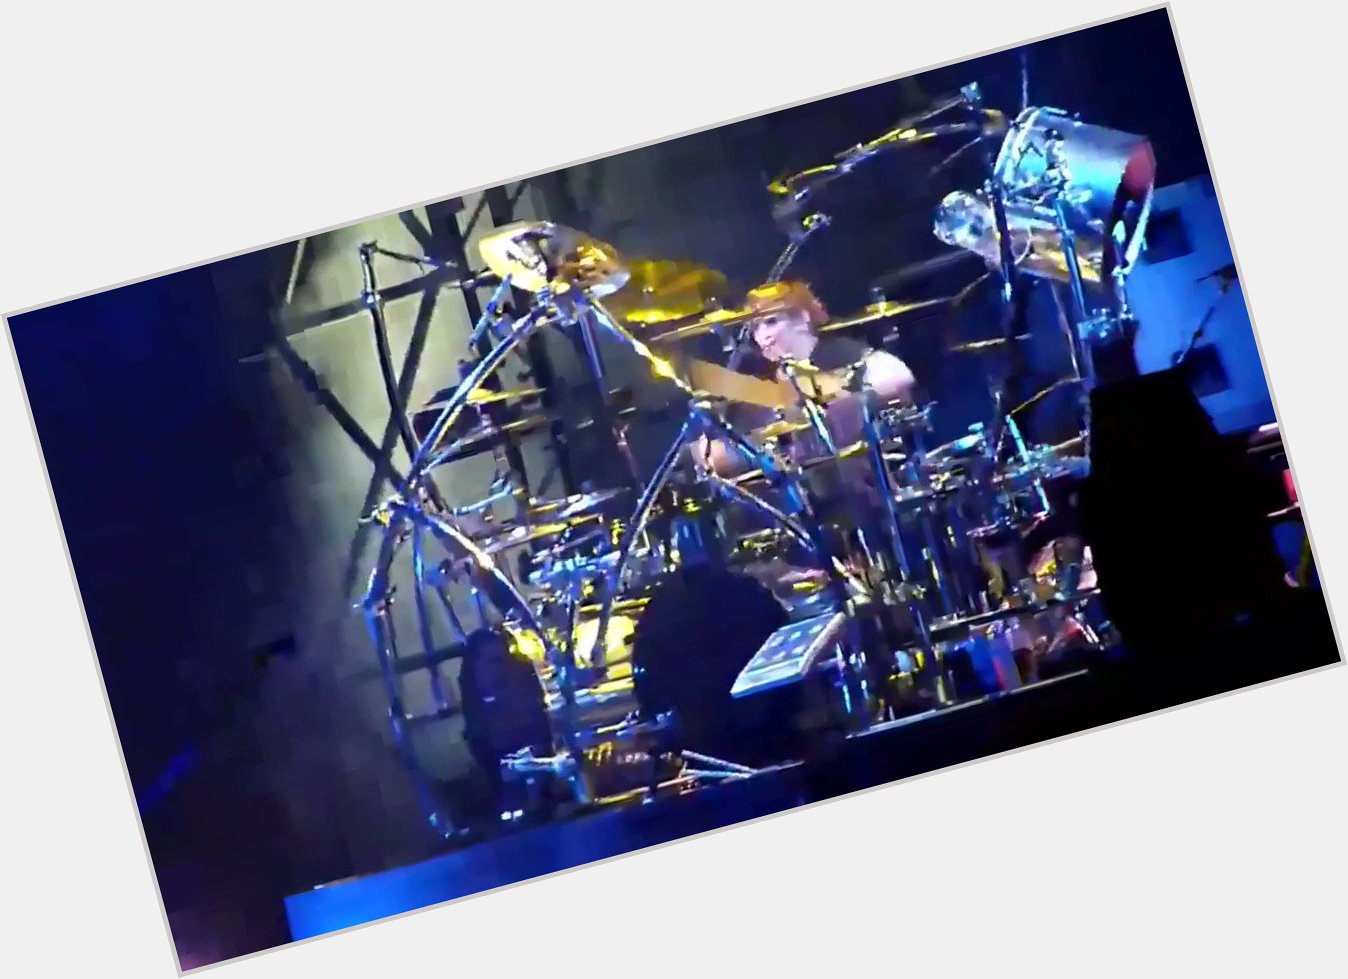 Happy Birthday Ray Luzier! Here\s a drum solo from Ray at the Mayhem Fest back in 2010. 